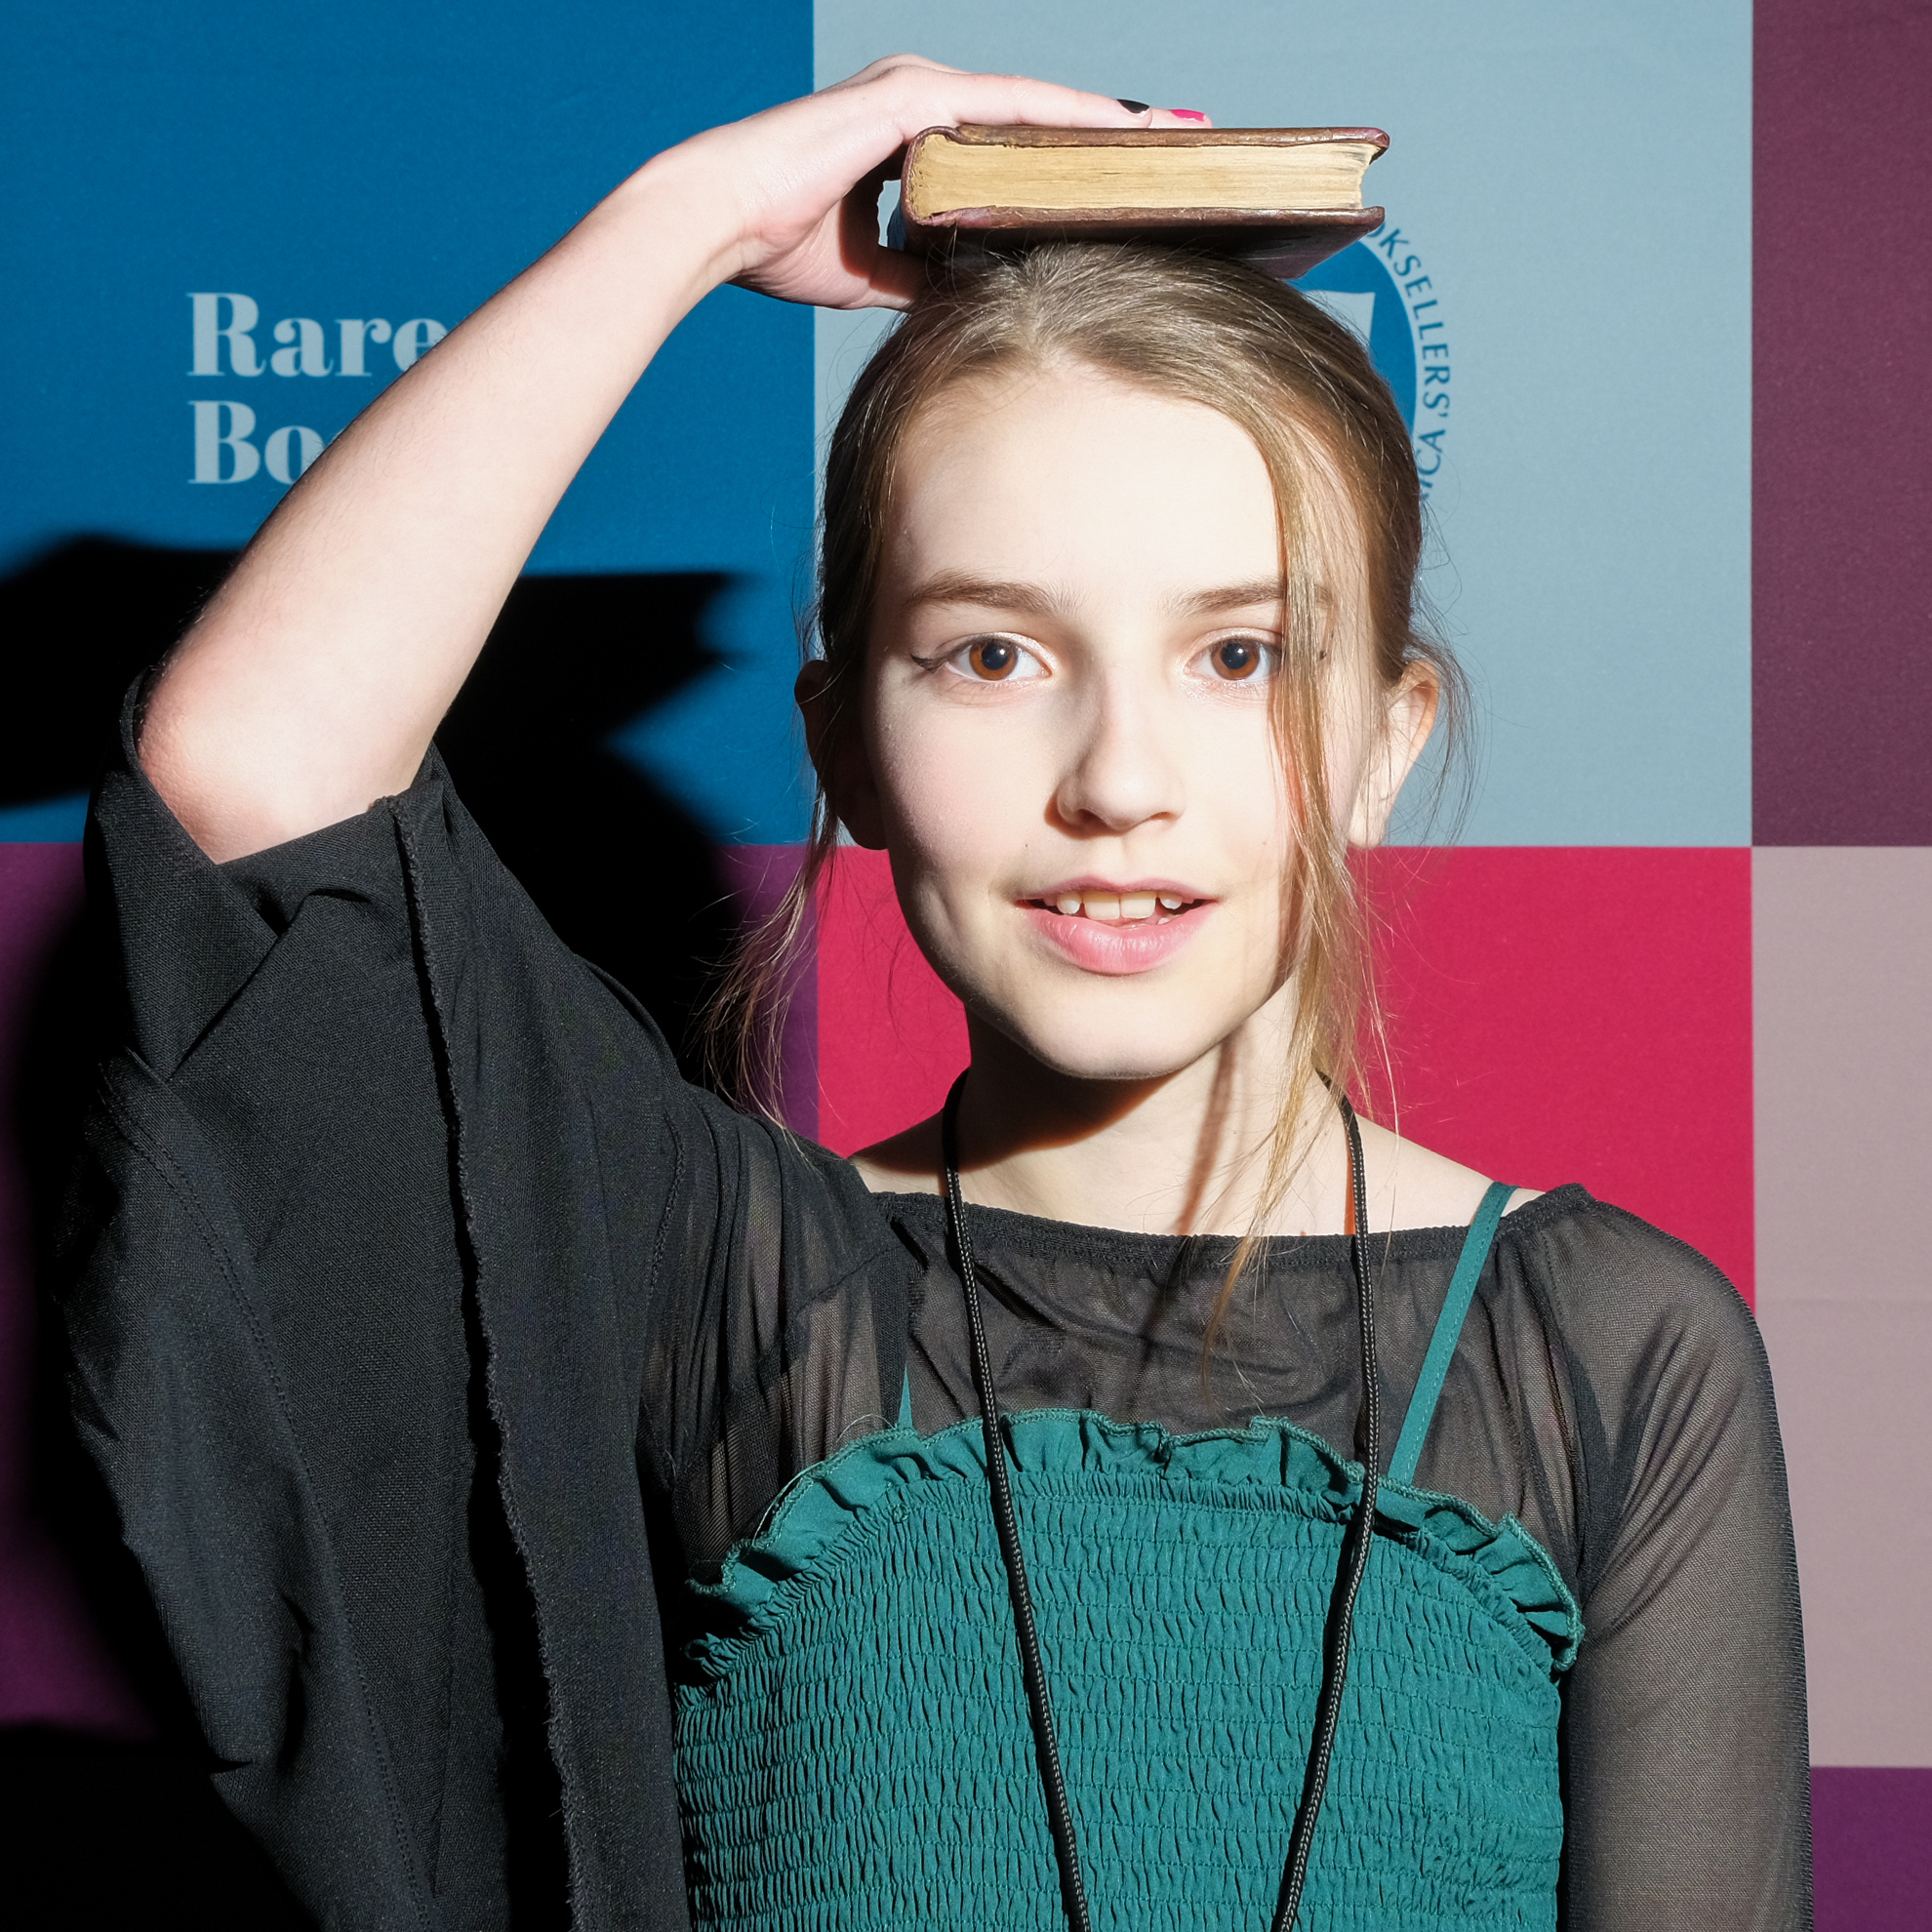 A girl balances a book on her head, wearing a black shirt, in front of a colorful backdrop.